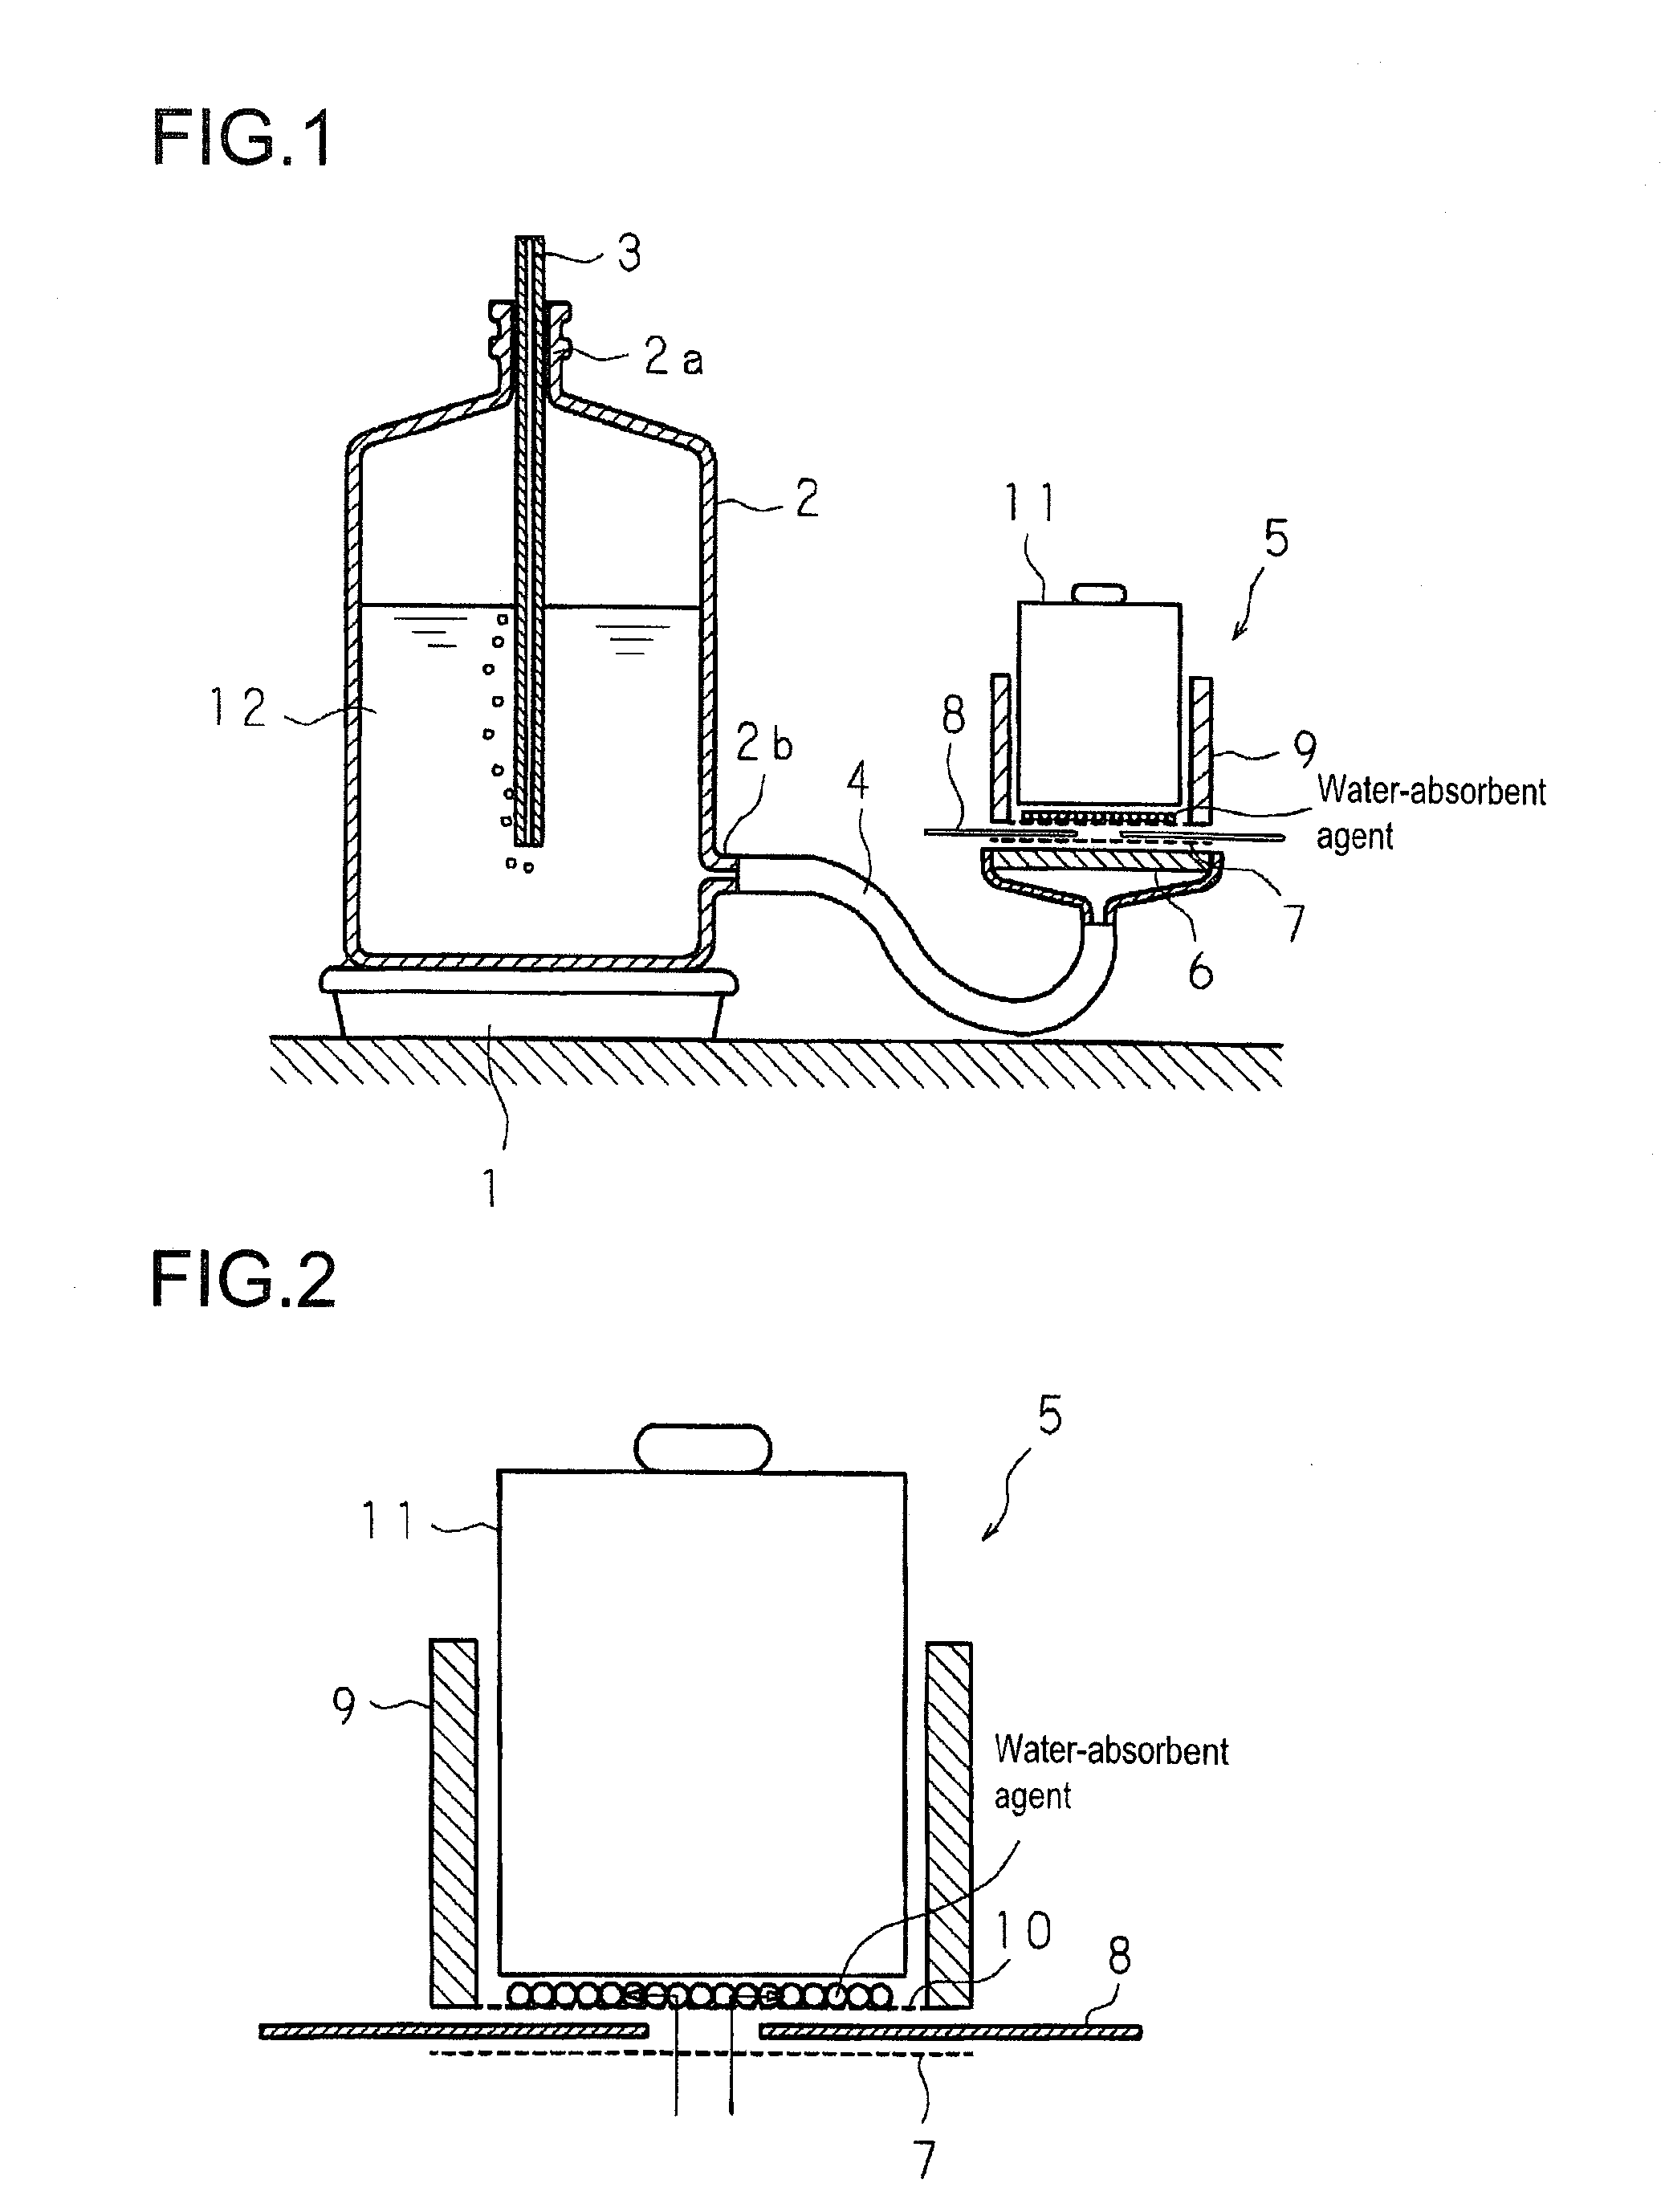 Particular water-absorbent agent having water-absorbent resin as main component